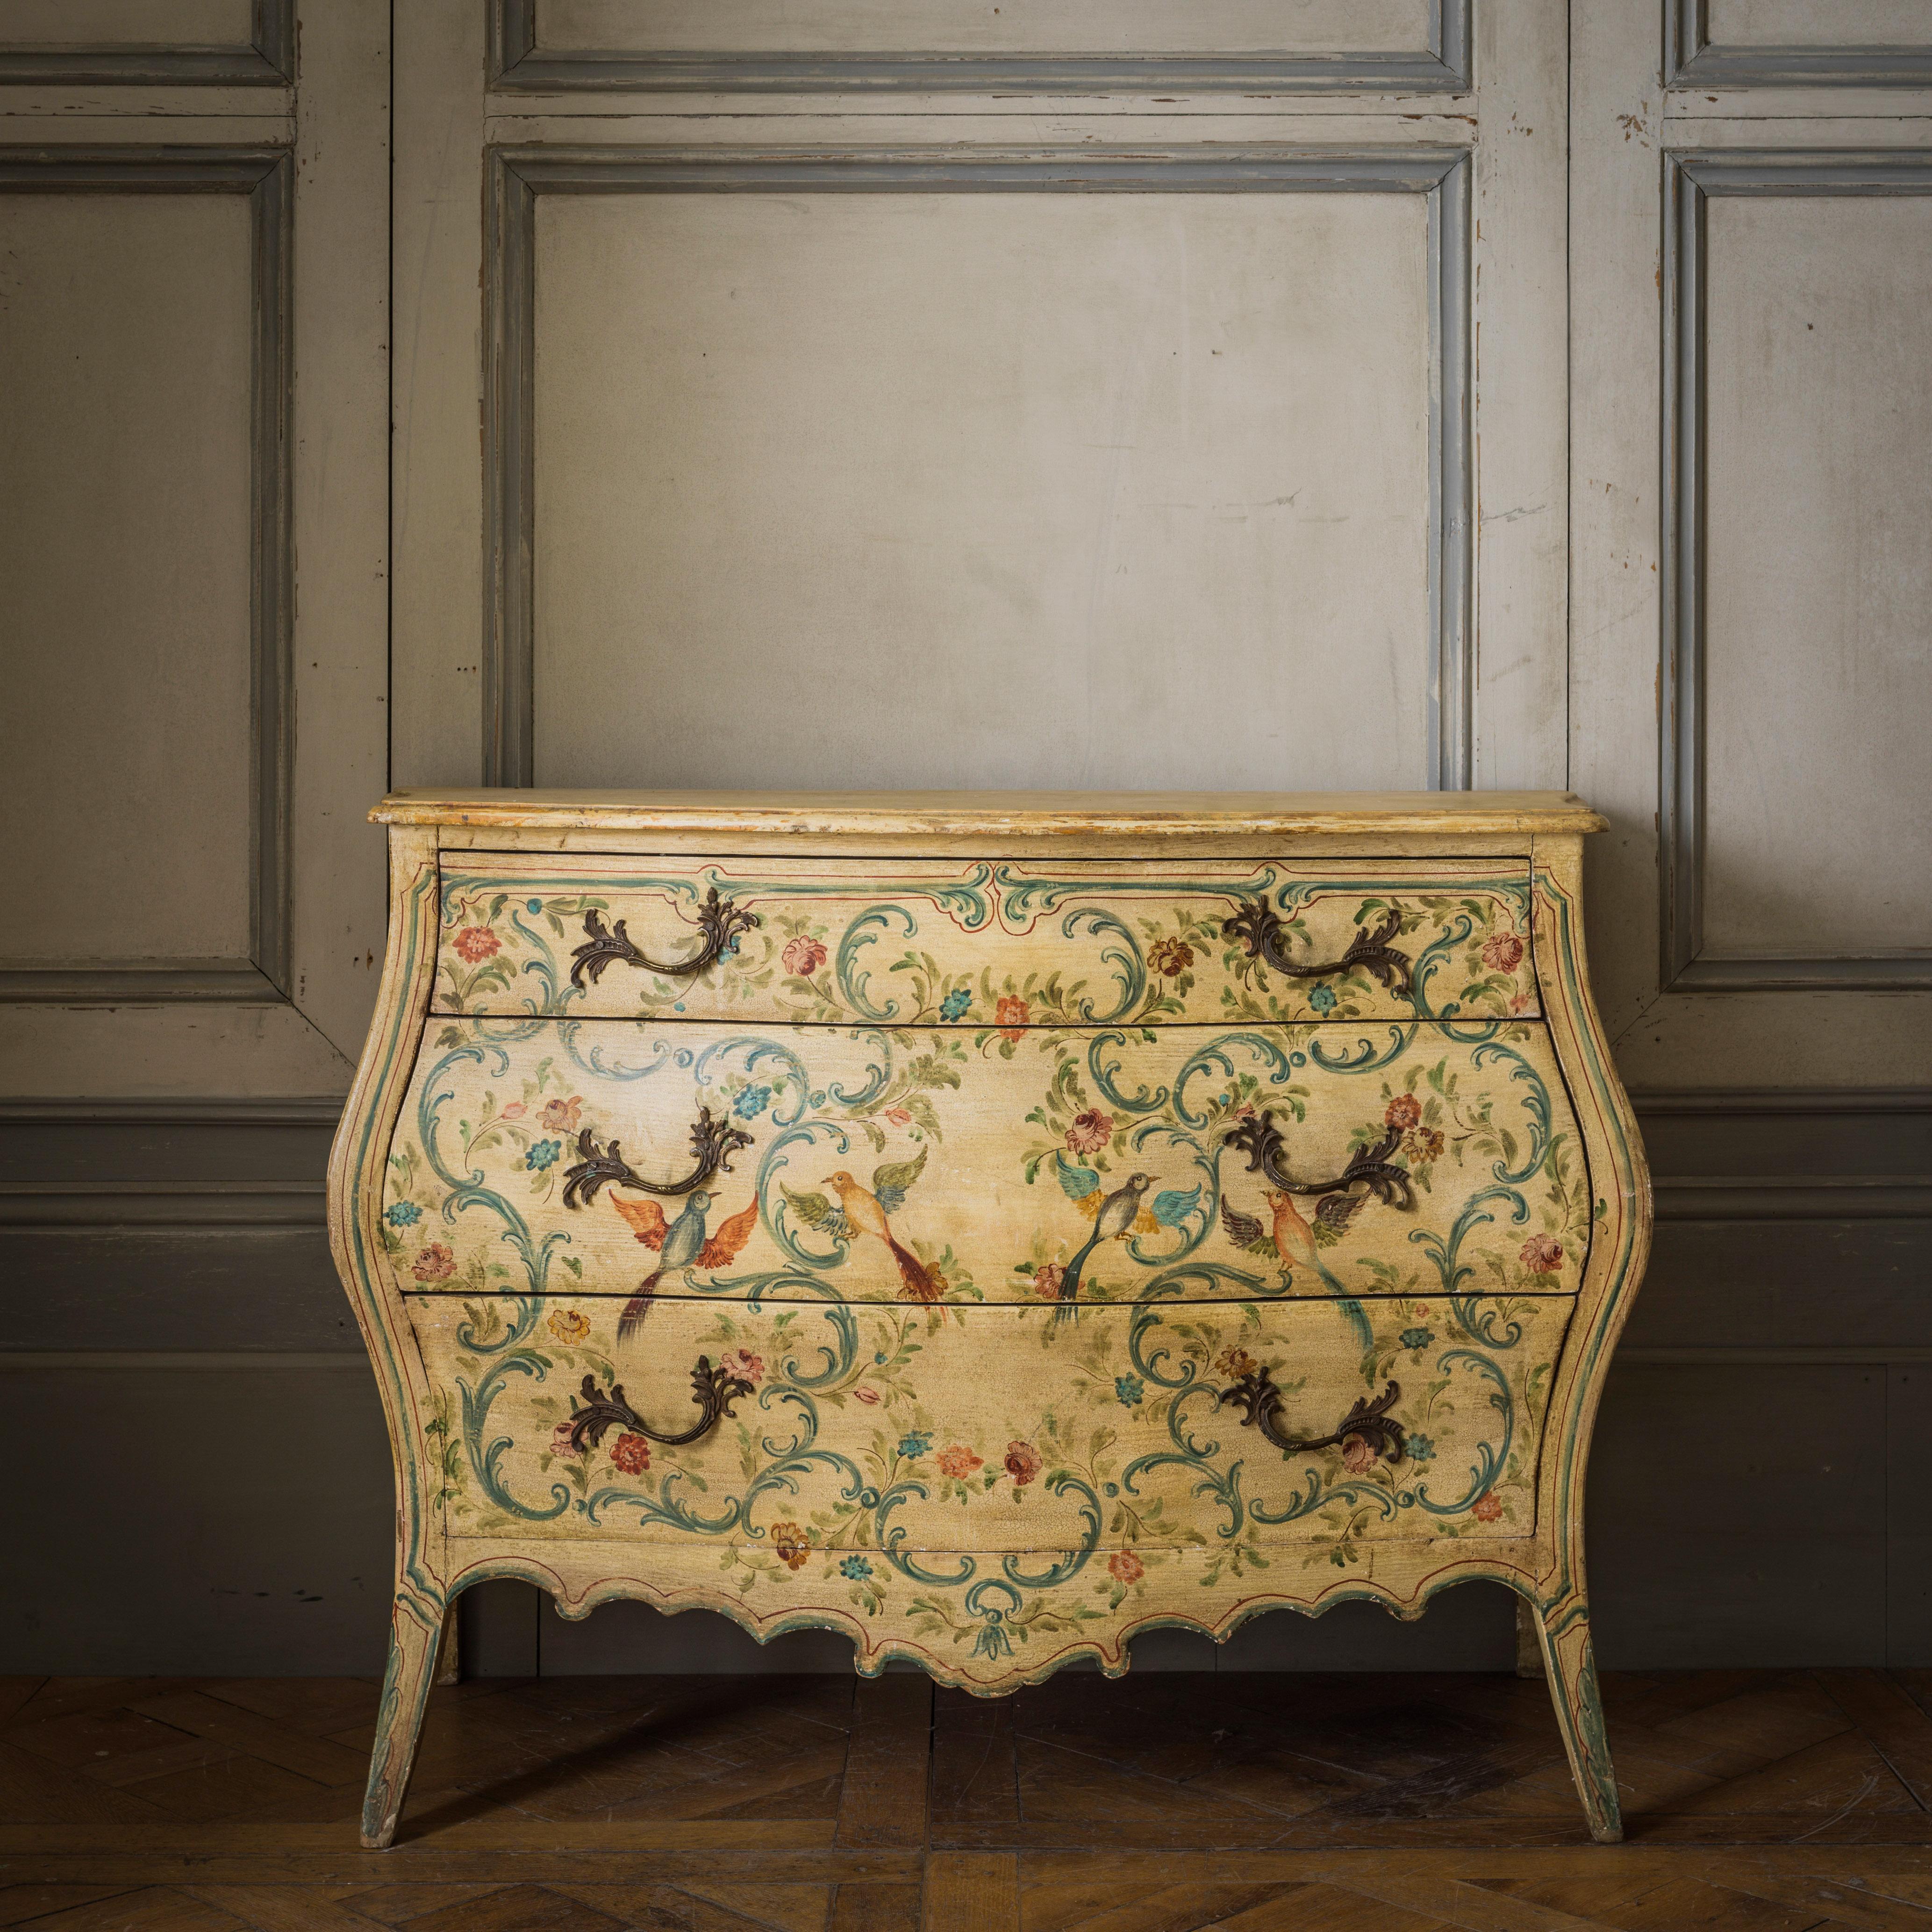 A late 19th century Venetian painted, bombe shaped chest with beveled top. The chest features finely hand painted Venetian work with depictions of stylised Rococo 's' curves, flowers and fanciful birds, all in tones of red, green and blue on a